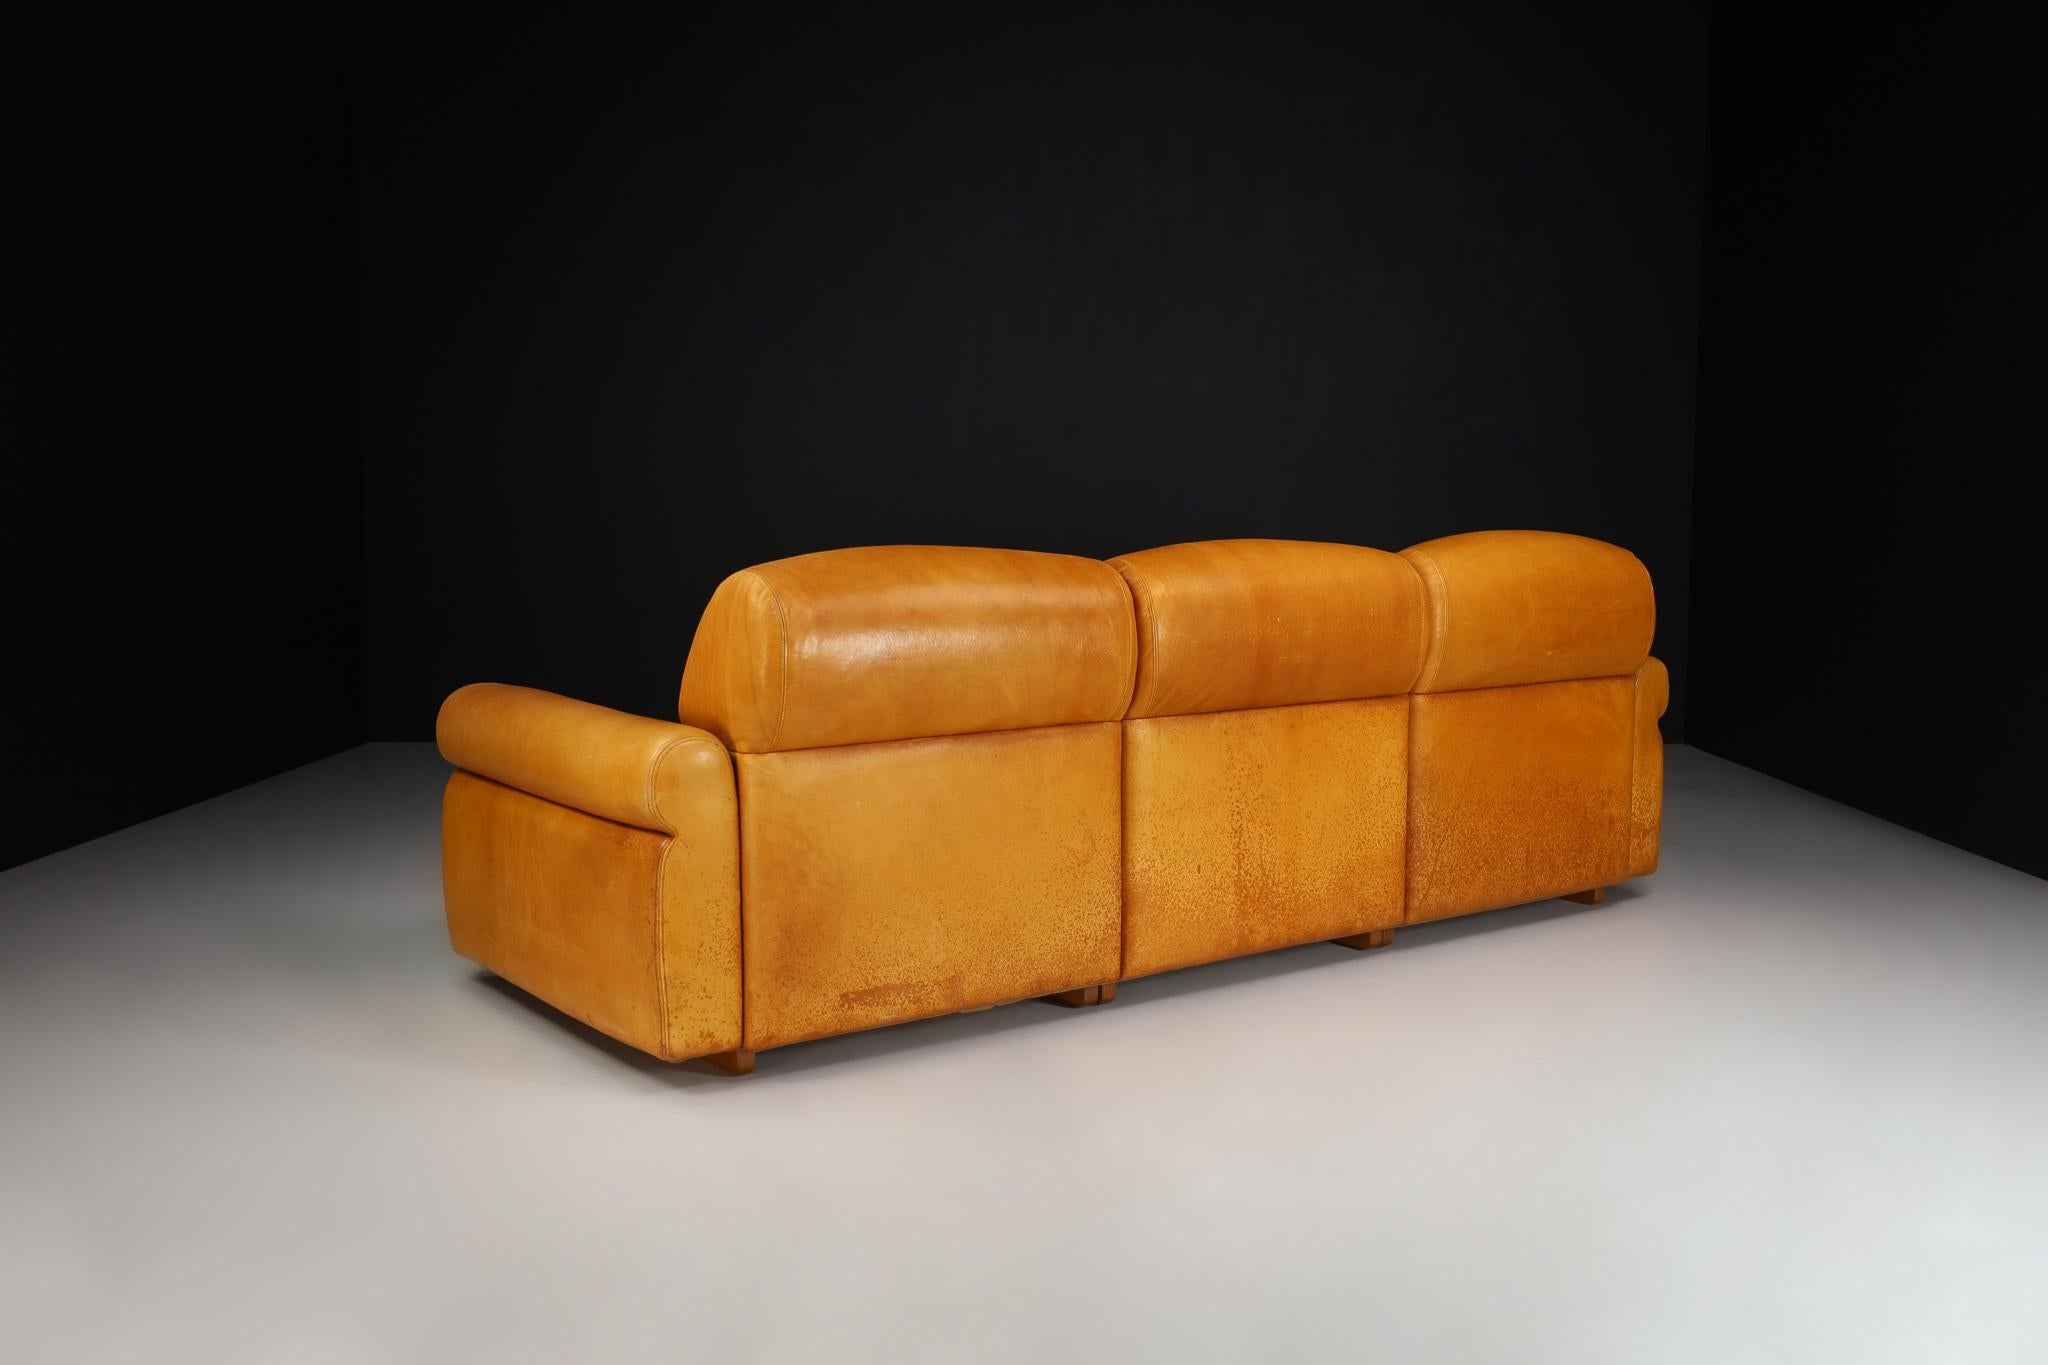 Large Mid-Century Modern Lounge Sofa in Cognac Leather, Italy 1960s For Sale 4